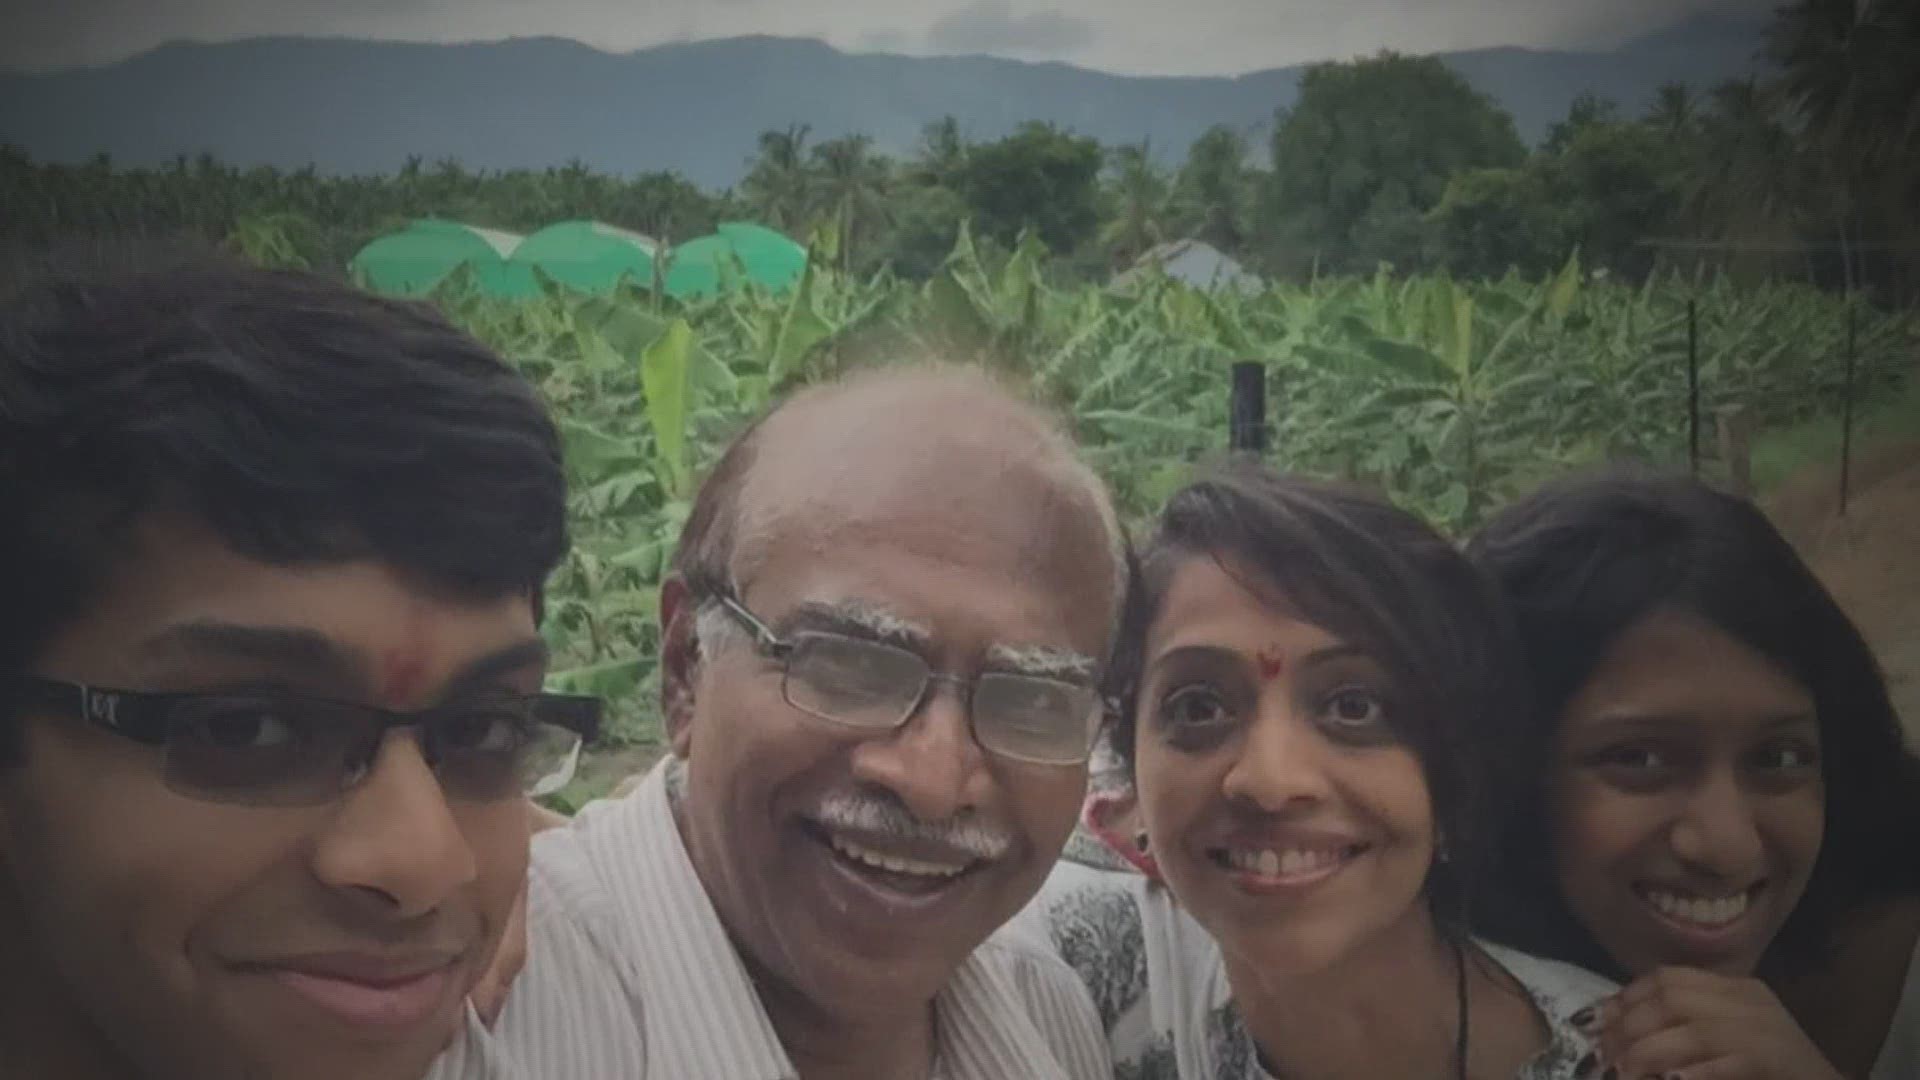 "Everything is about COVID right now. There is a lot of fear on the ground," said Rohini Sheeba, of Richardson, who is now in India after her dad got COVID-19.